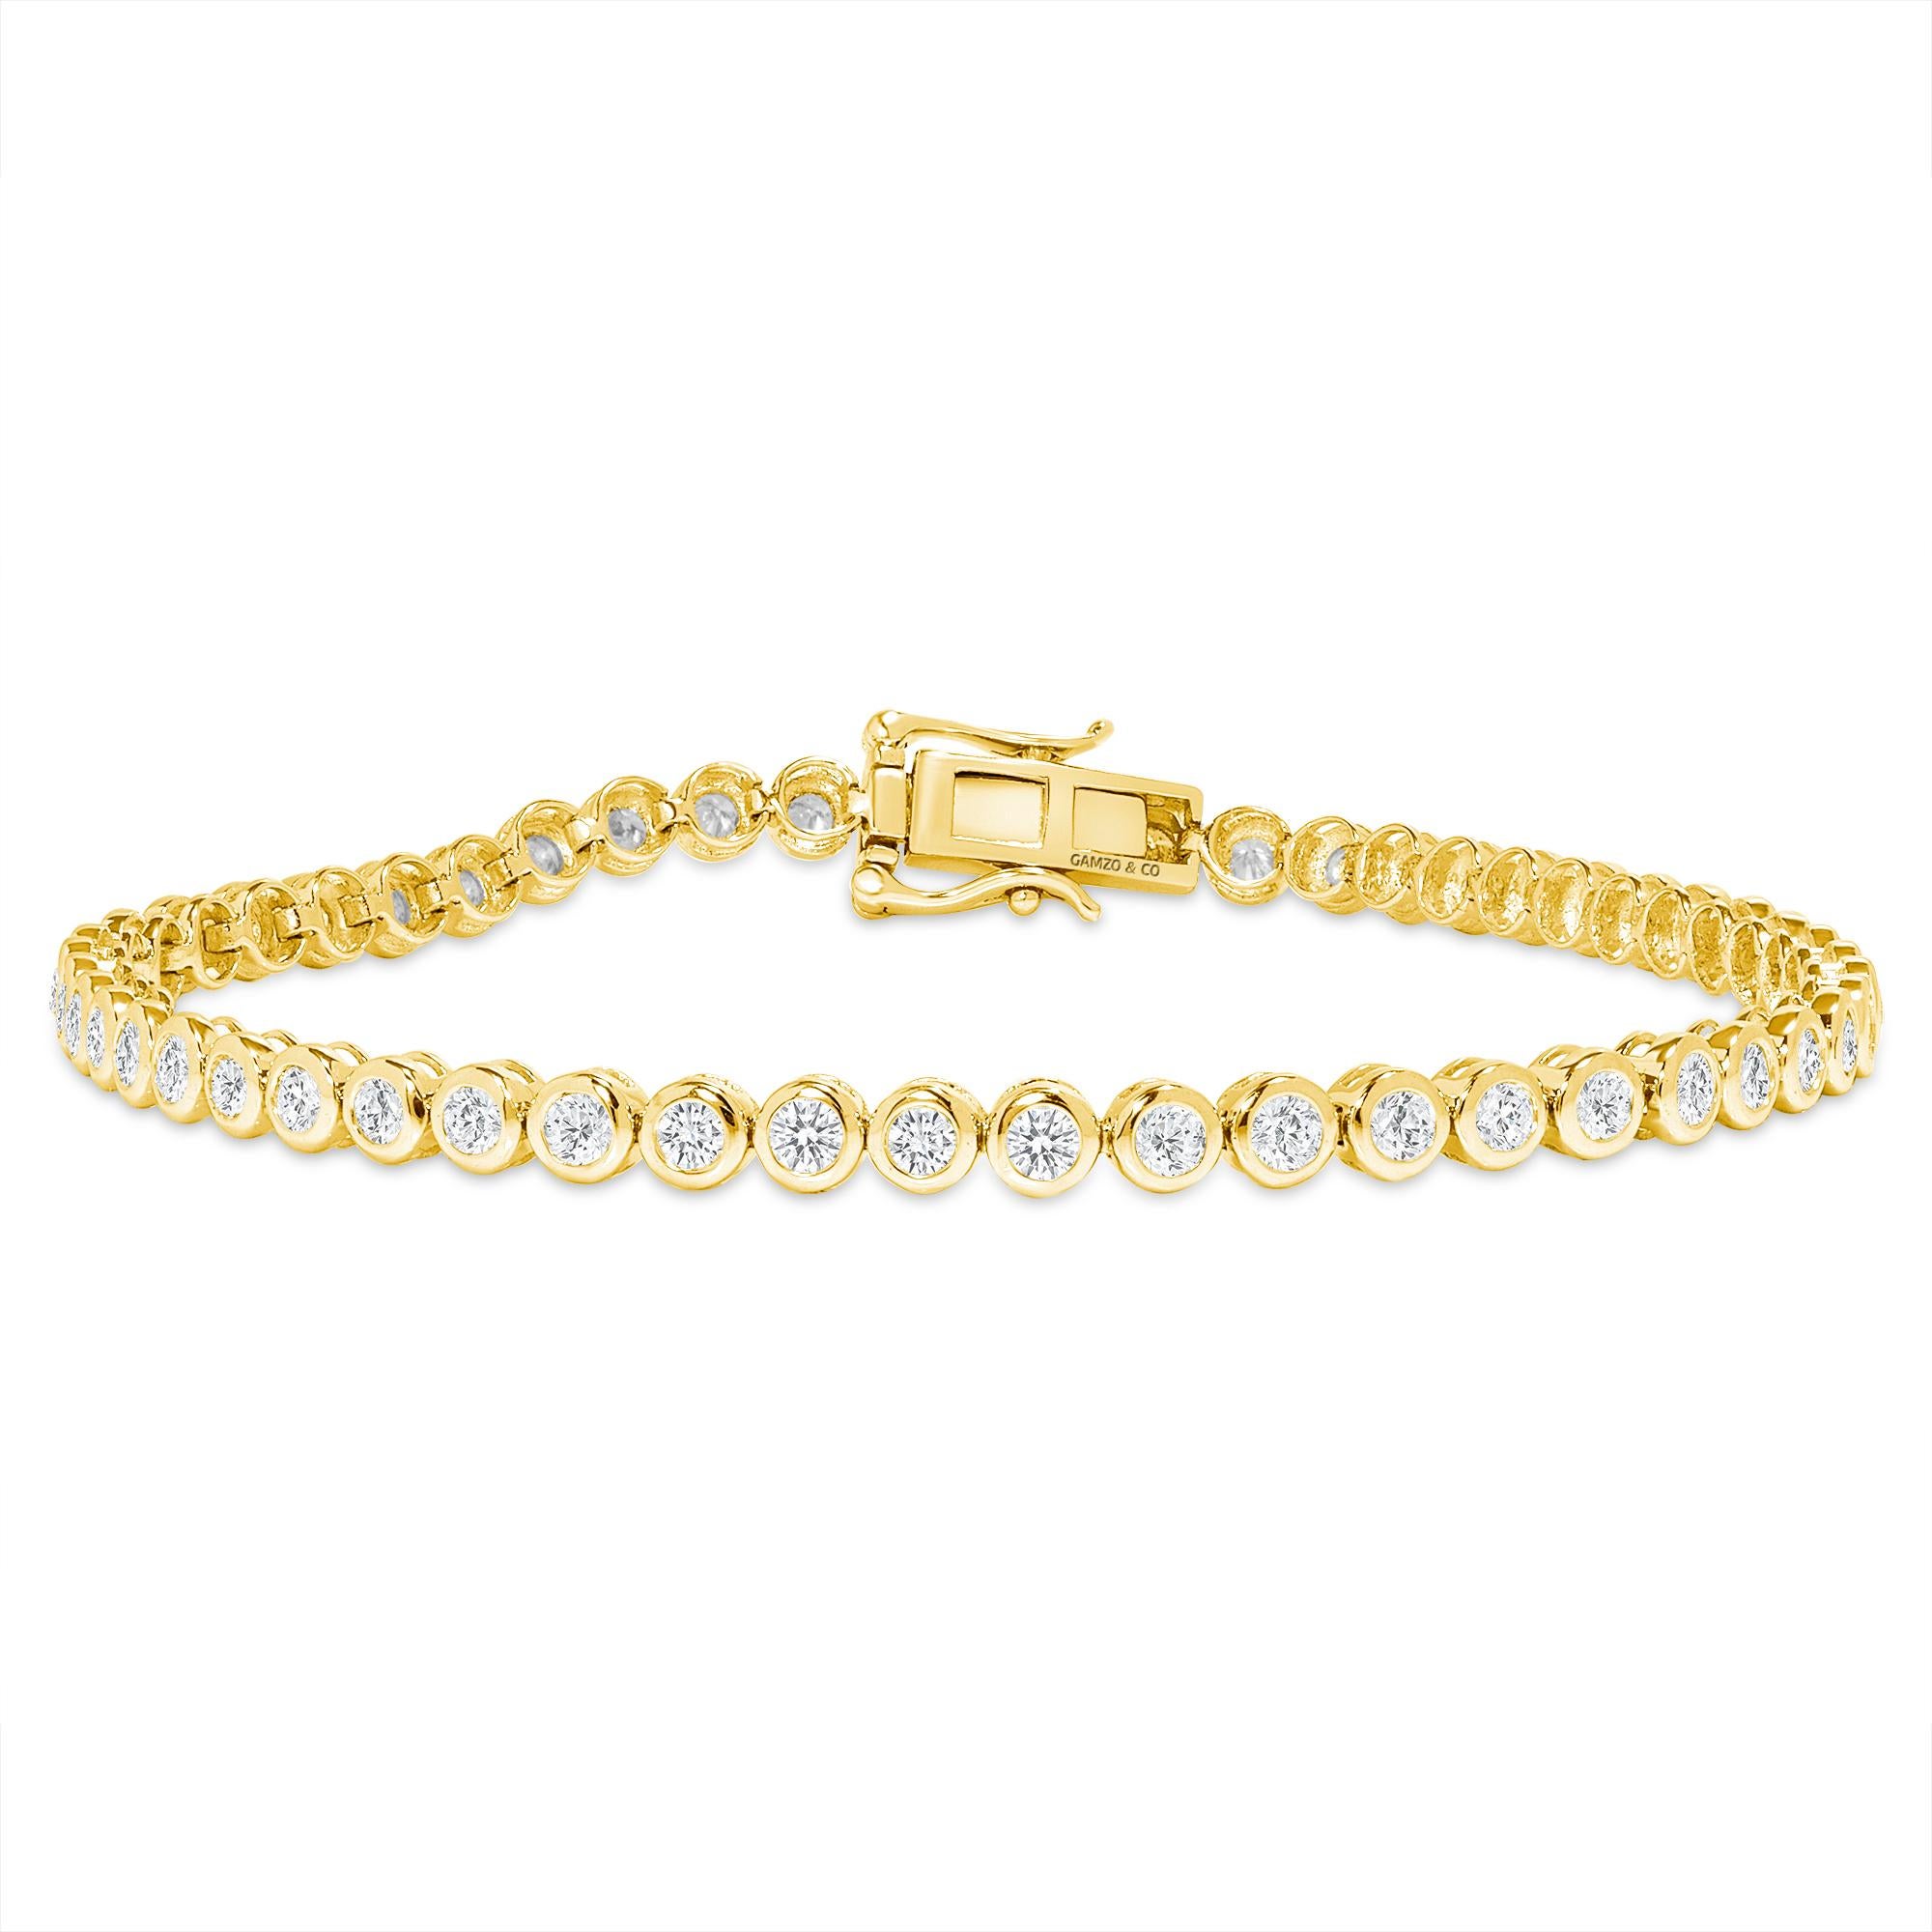 These beautiful round diamonds dance around your wrist as they absorb light and attention.
Metal: 14k Gold
Diamond Cut: Round
Diamond Total Carats: 5ct
Diamond Clarity: VS
Diamond Color: F
Color: Yellow Gold
Bracelet Length: 6 Inches 
Included with